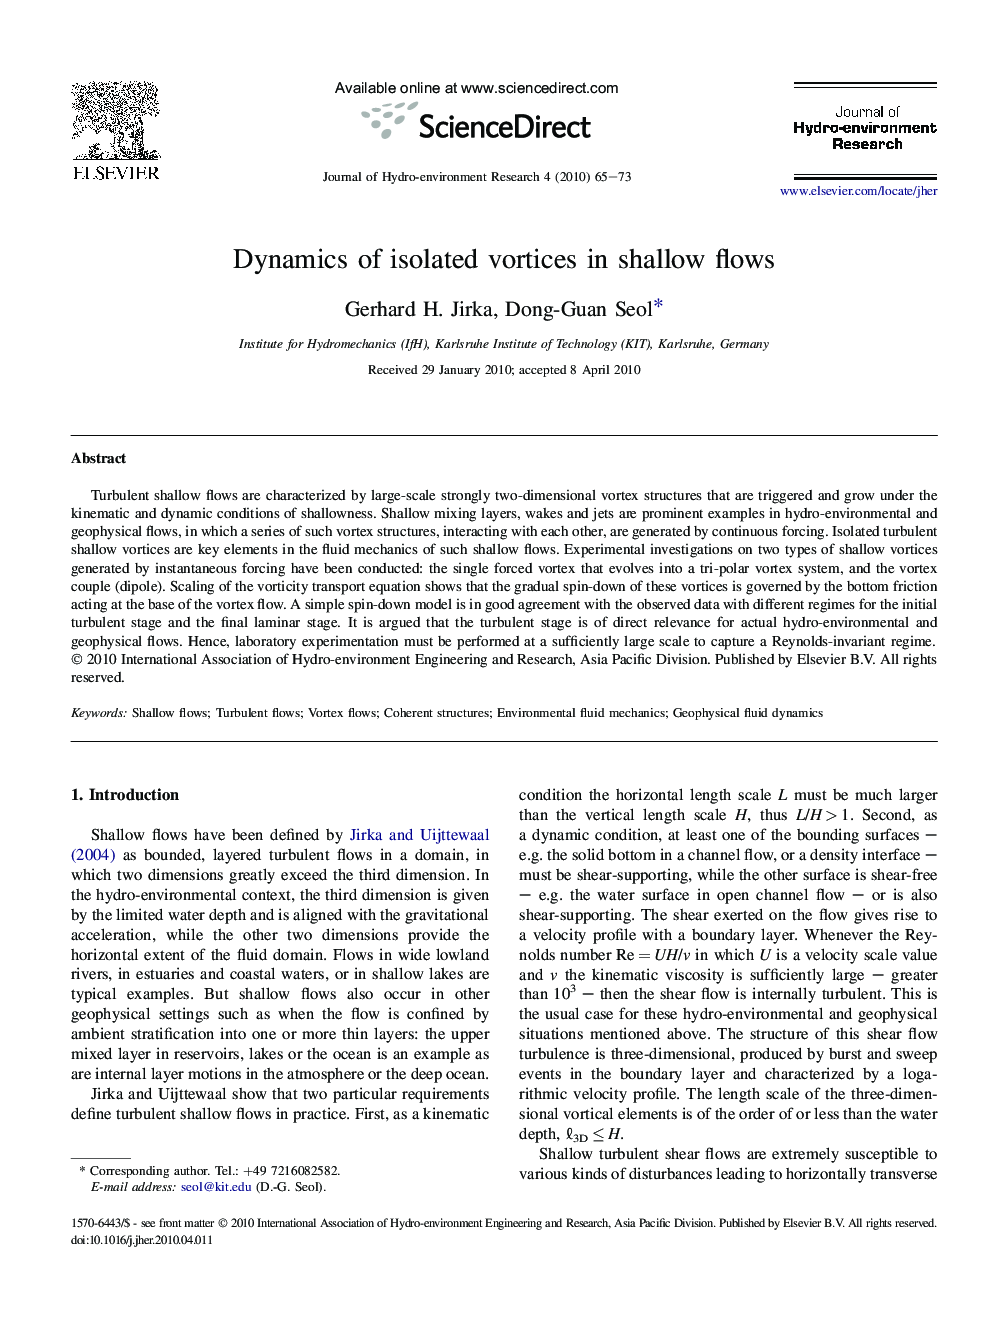 Dynamics of isolated vortices in shallow flows